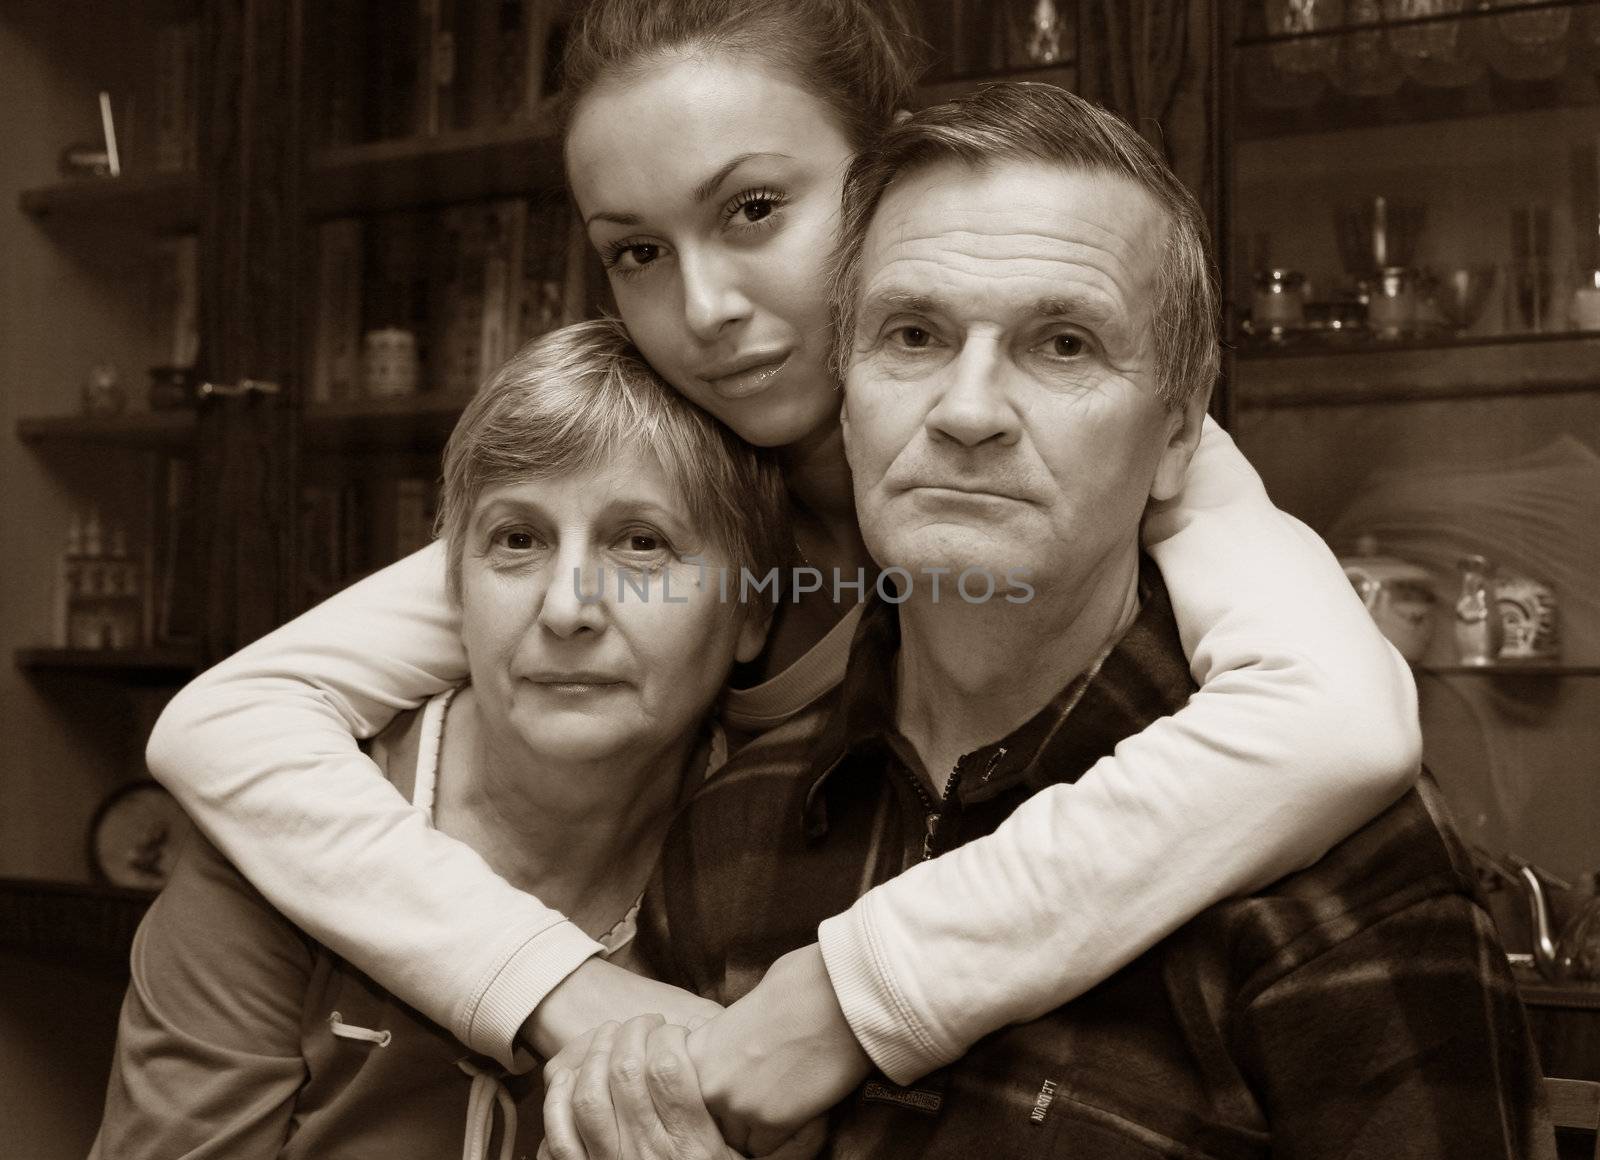 The grand daughter embraces the grandmother and the grandfather